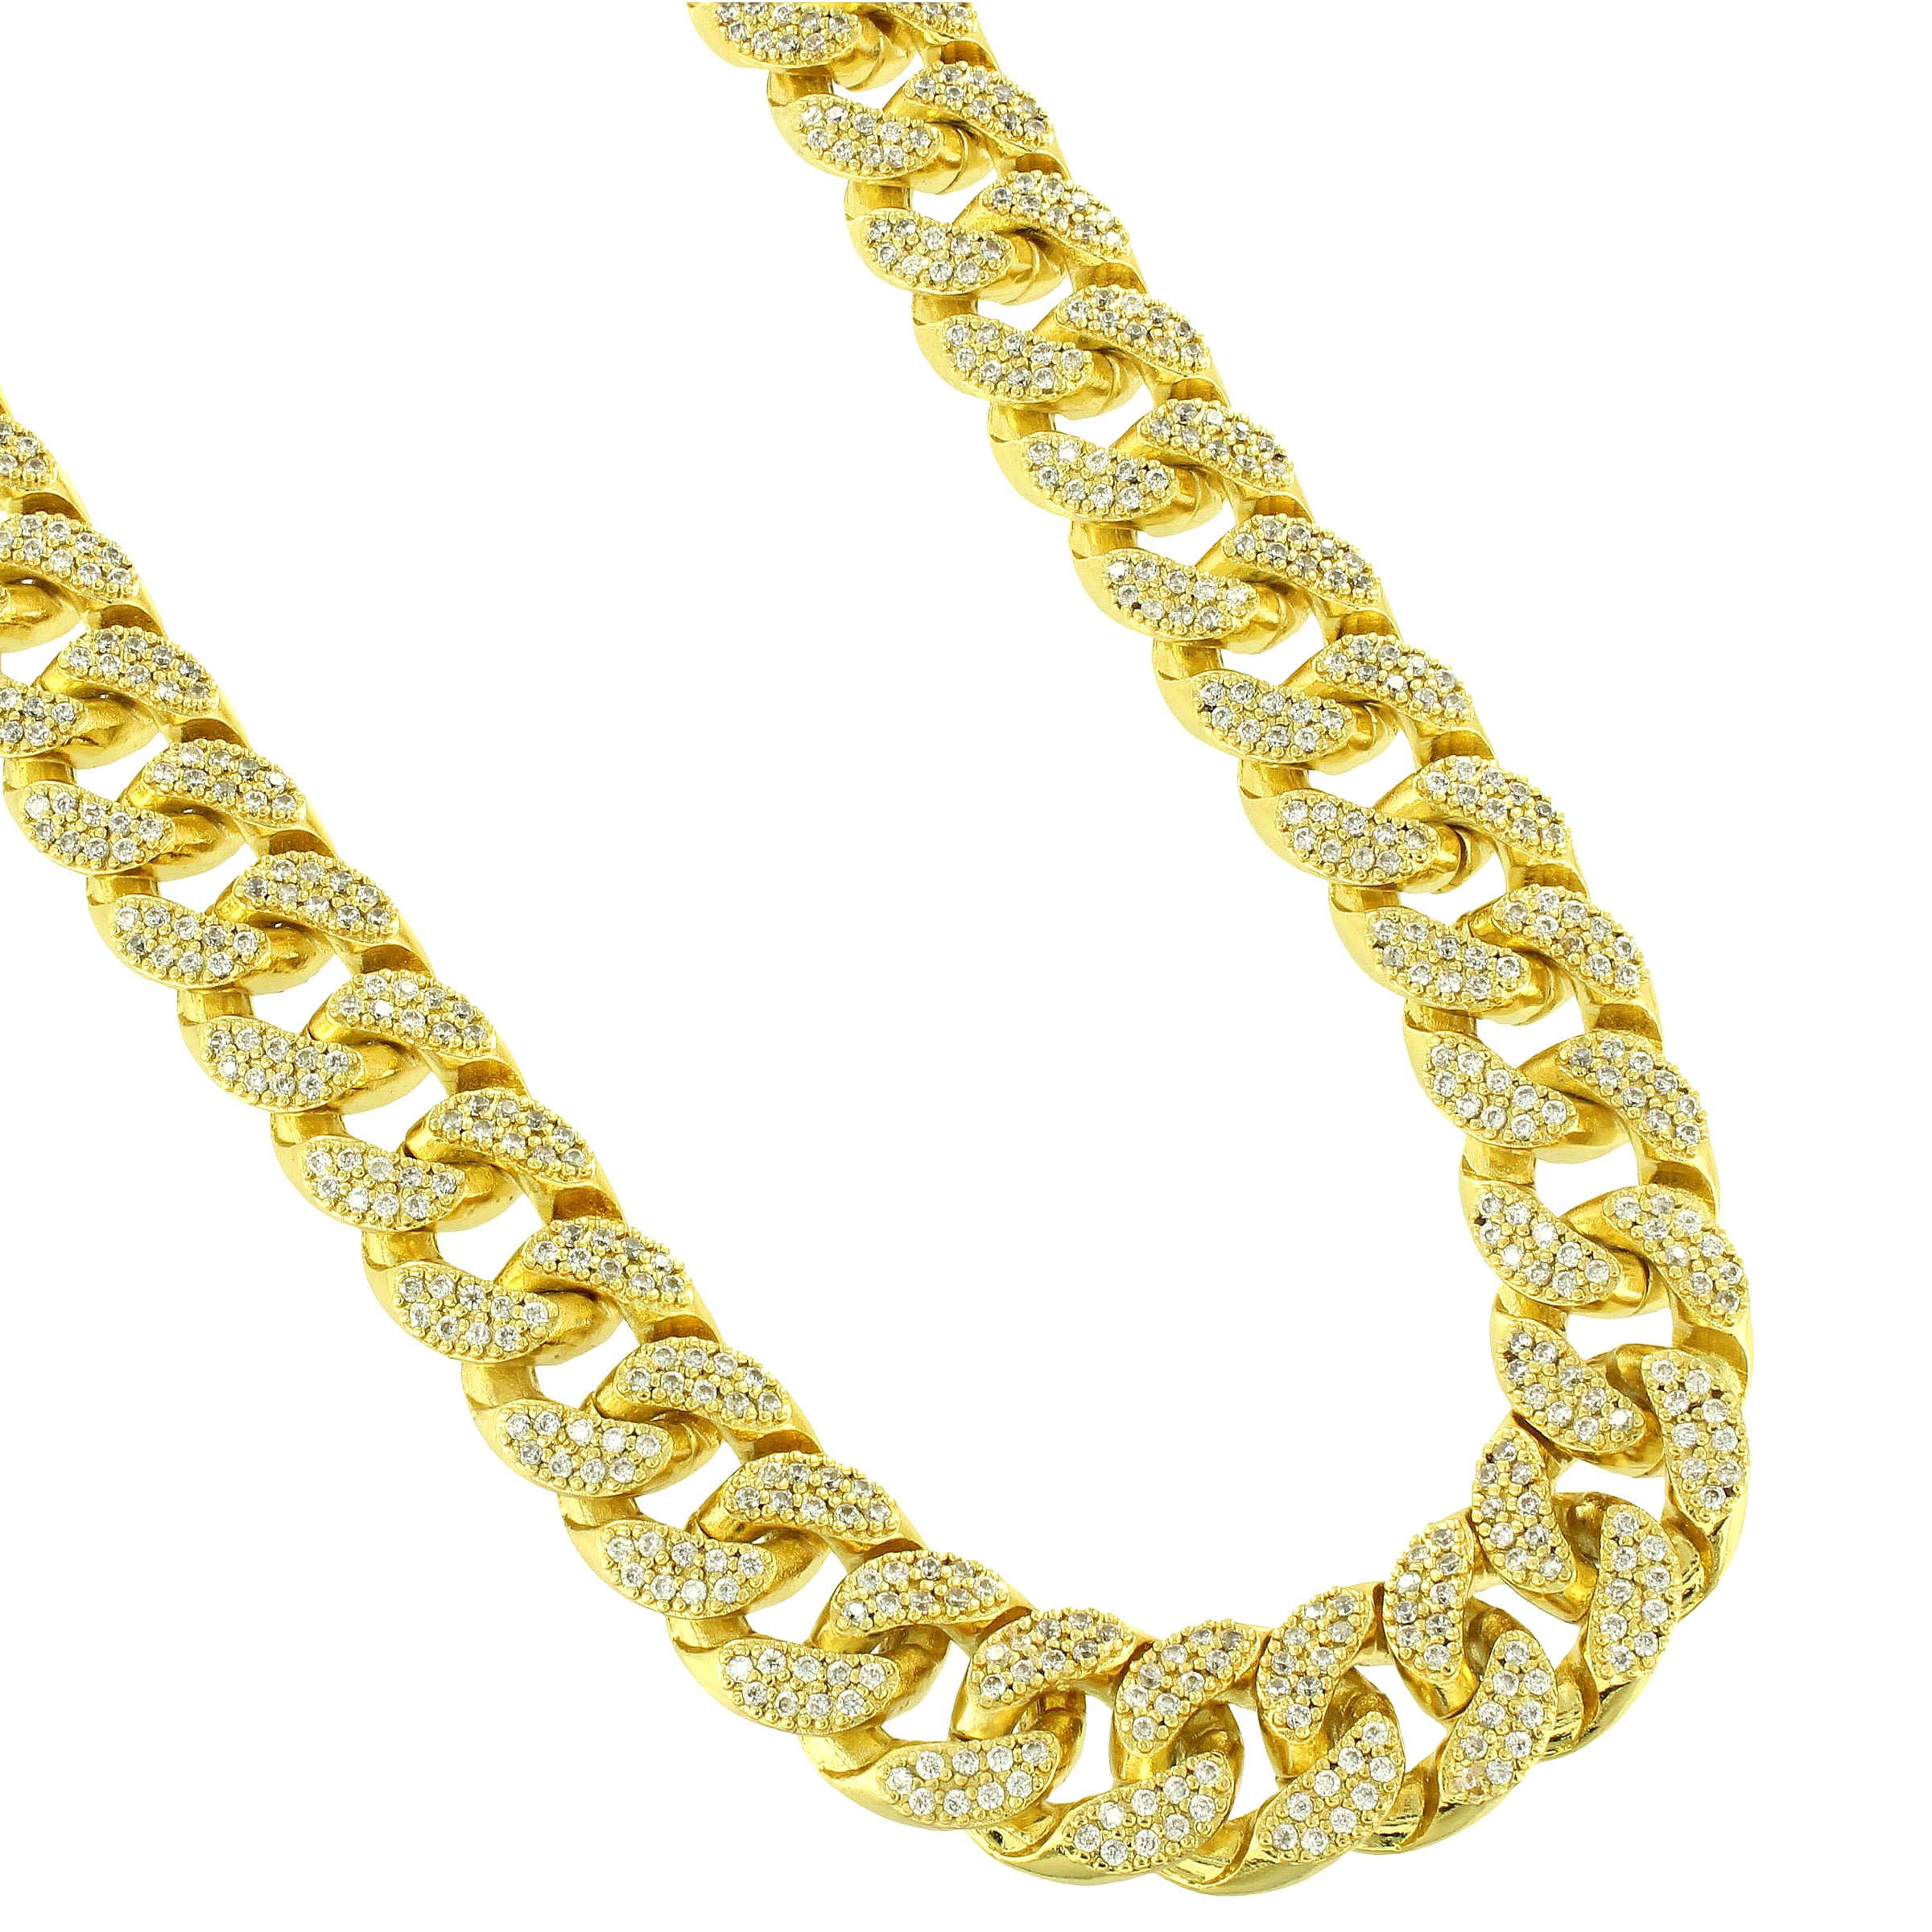 Men's Miami Cuban Link Chain Real 14k Gold Over Stainless Steel Icy Necklace 